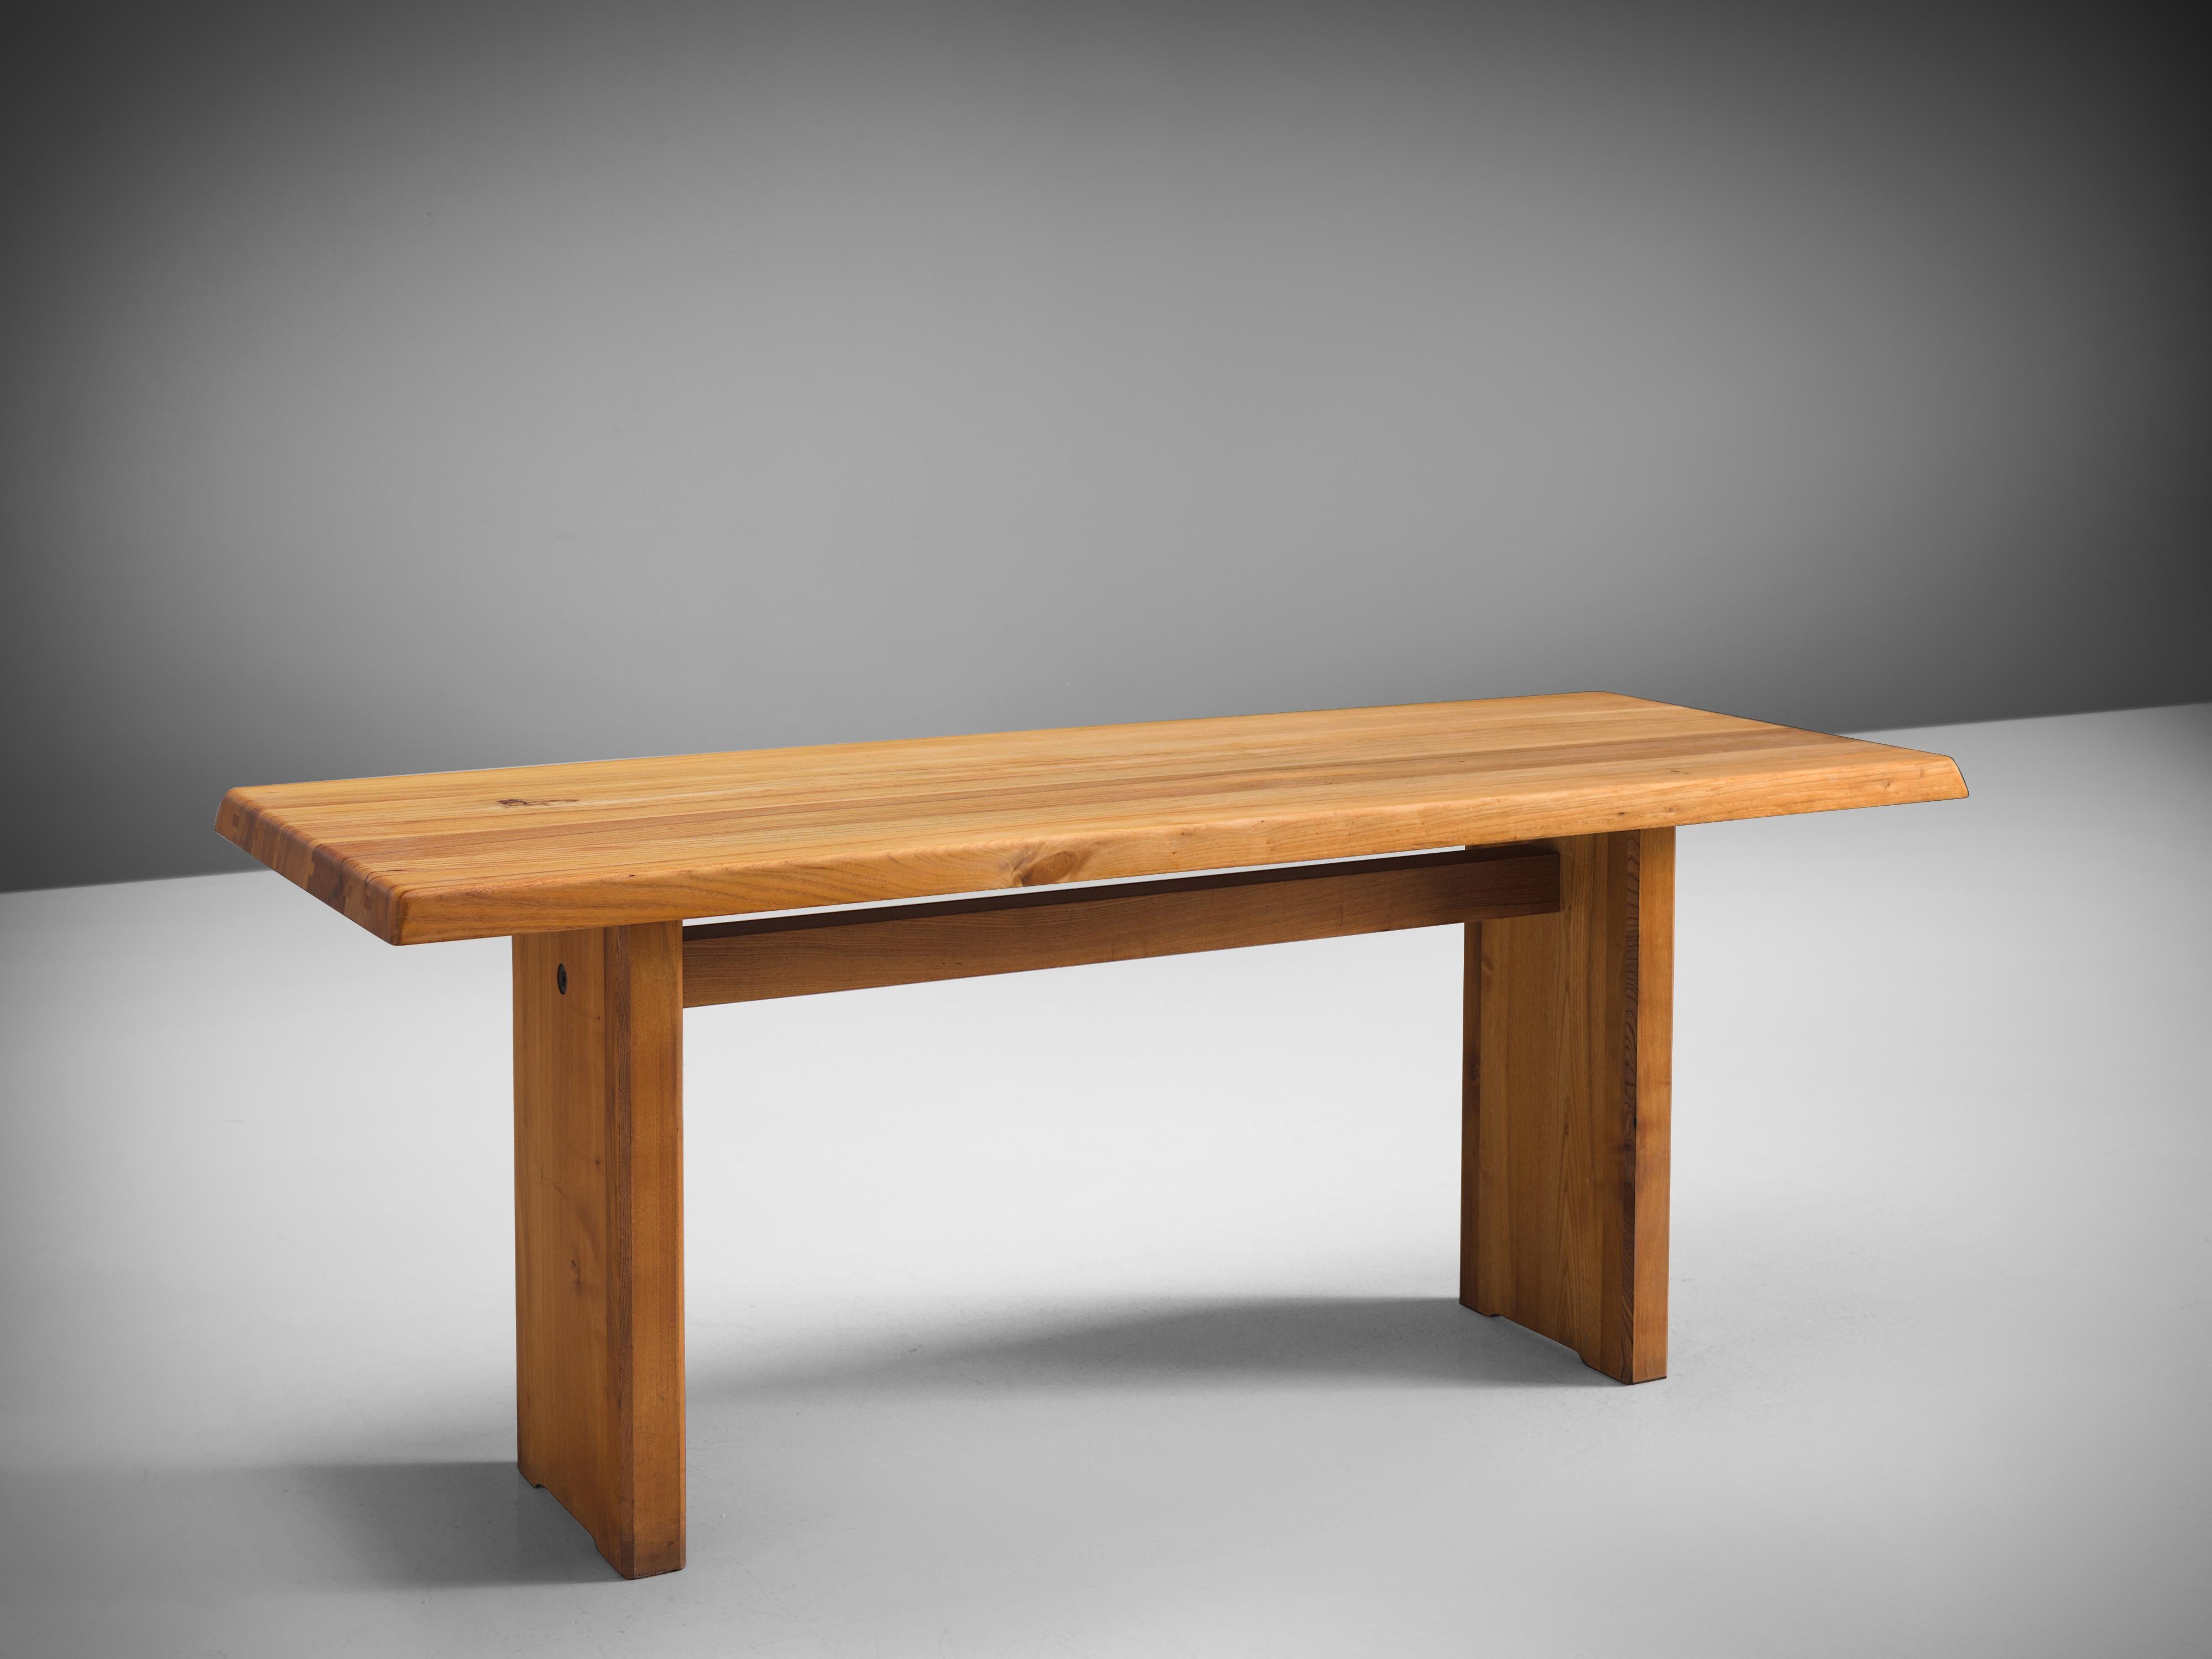 Pierre Chapo, dining table model T14C, elm, France, design 1960s, later production

This dining table is designed by the French designer Pierre Chapo. Strong and simplified design which clearly emerges the woods grain and natural look. The